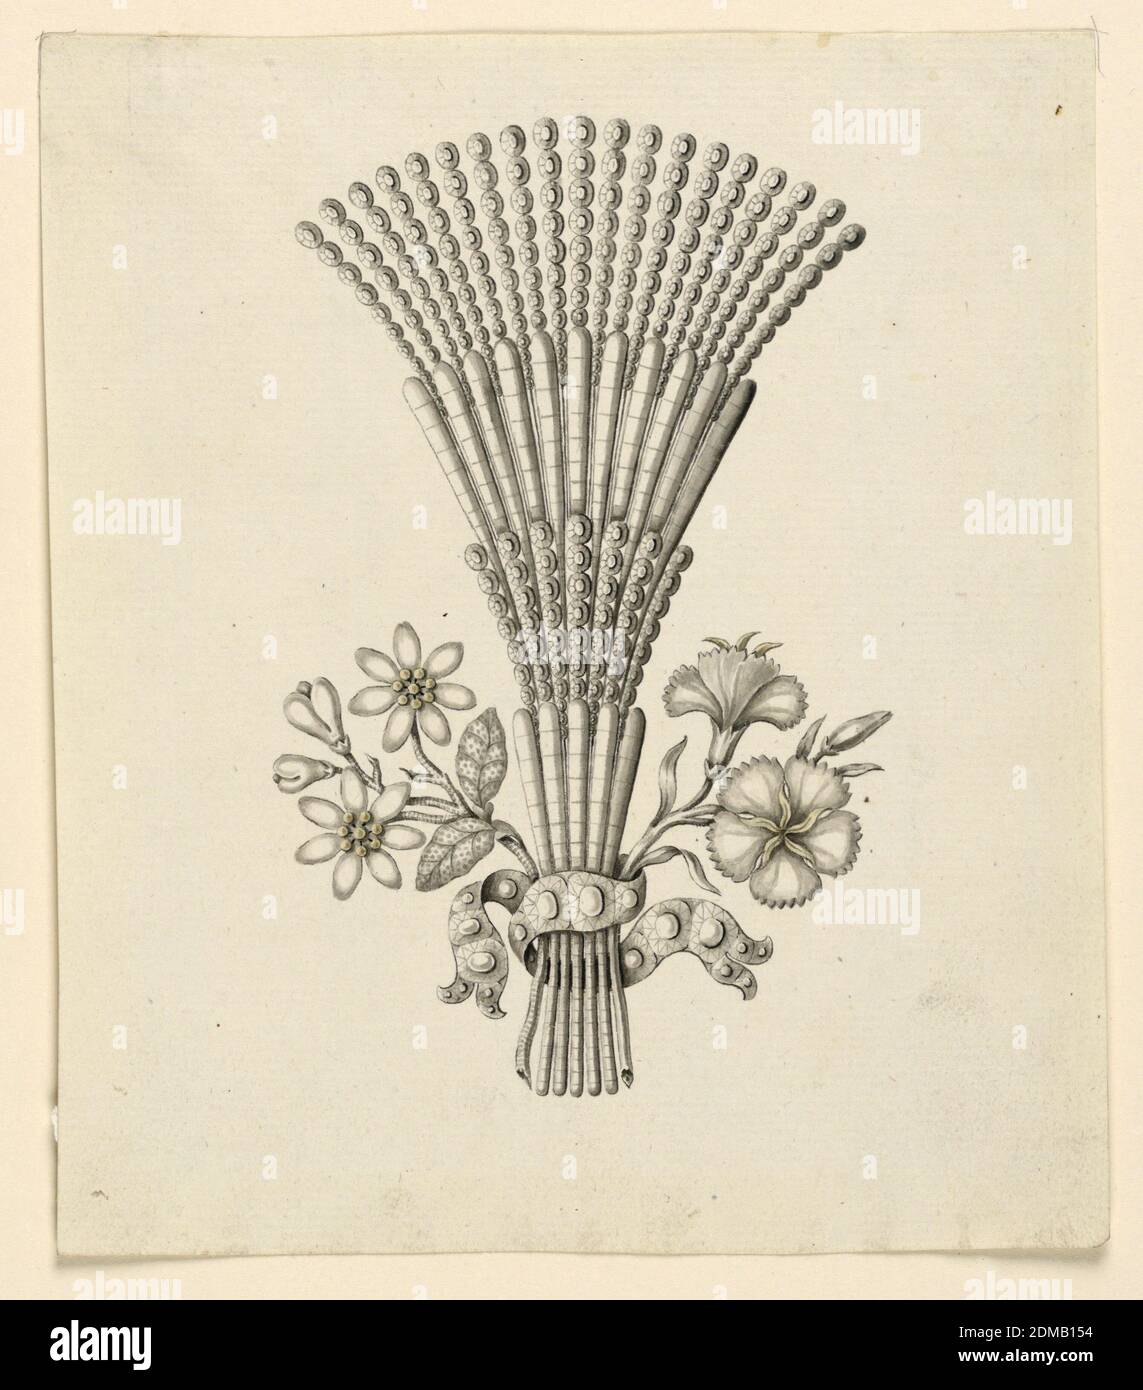 Design for a Hairdress, Pen and black ink, brush and gray, yellow watercolor on paper, Jewelry design for a hairdress. A bunch of seven branches, fastened by a ribbon. The central ones are fan-like with alternating parts of bars and rows of disks. Outside, two branches with blooming flowers (carnations)., probably Naples, South Italy, Italy, late 18th century, jewelry, Drawing Stock Photo